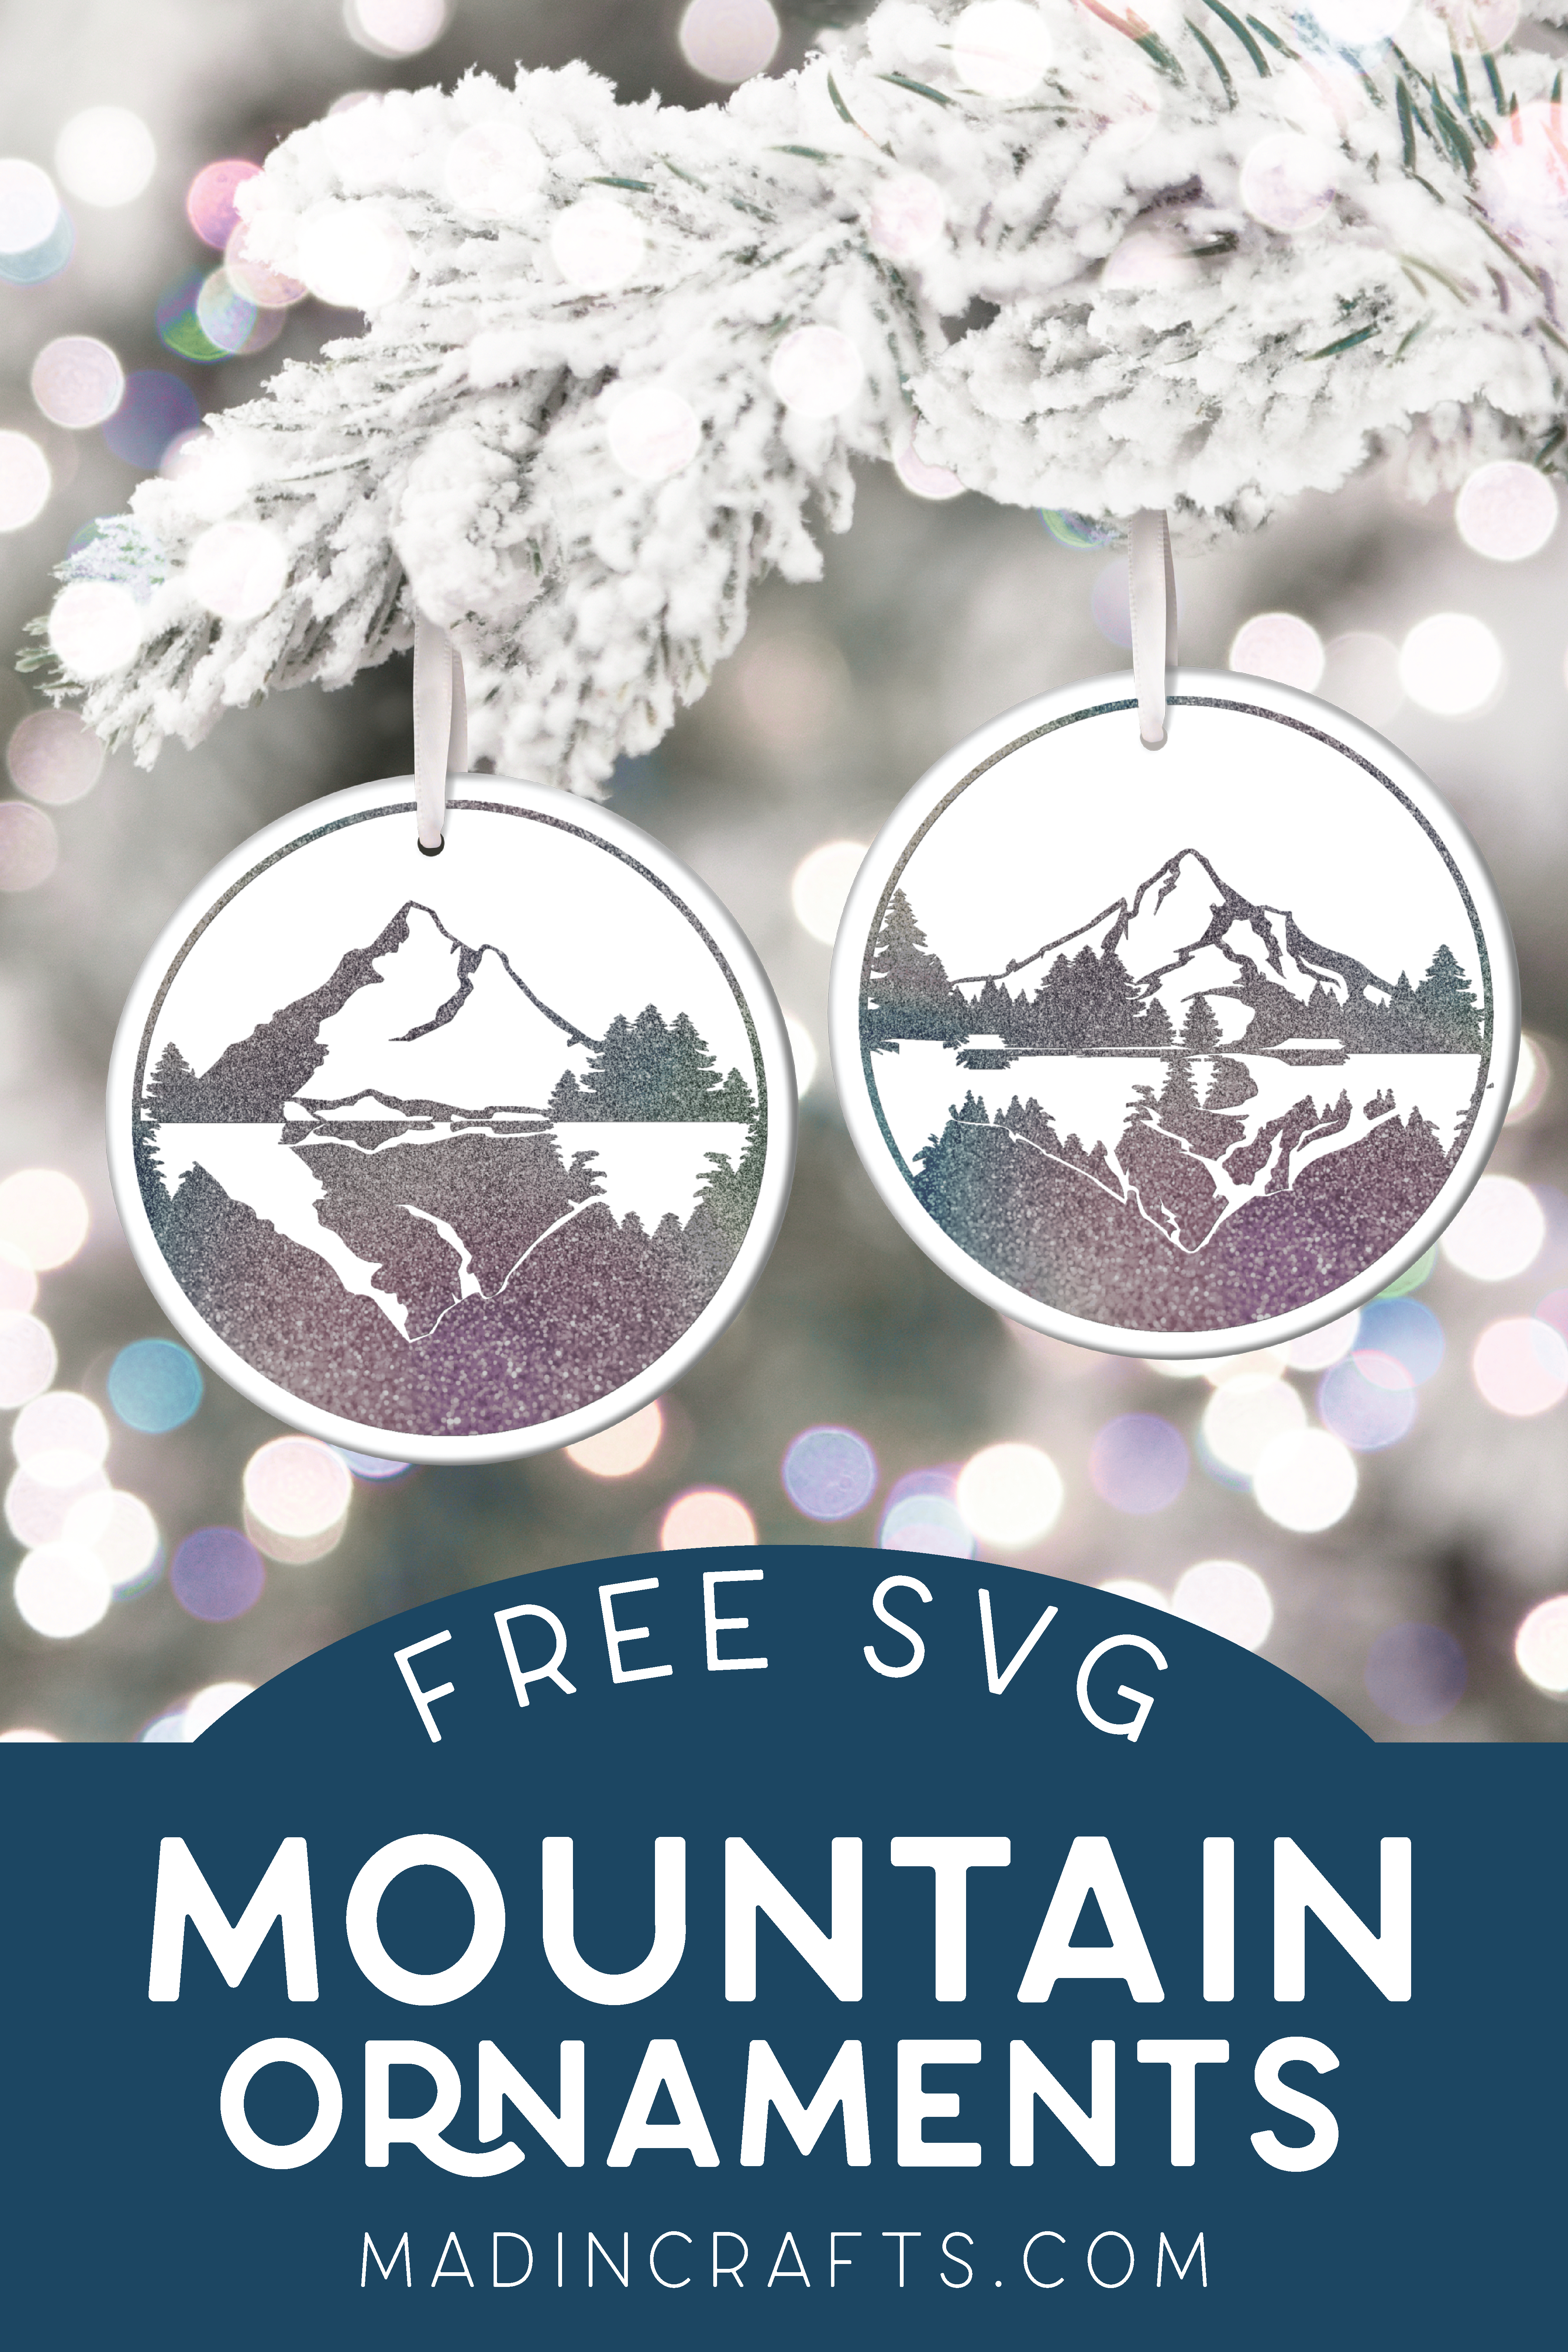 two ceramic circle ornaments decorated with glittery vinyl mountain scenes hanging from a flocked tree